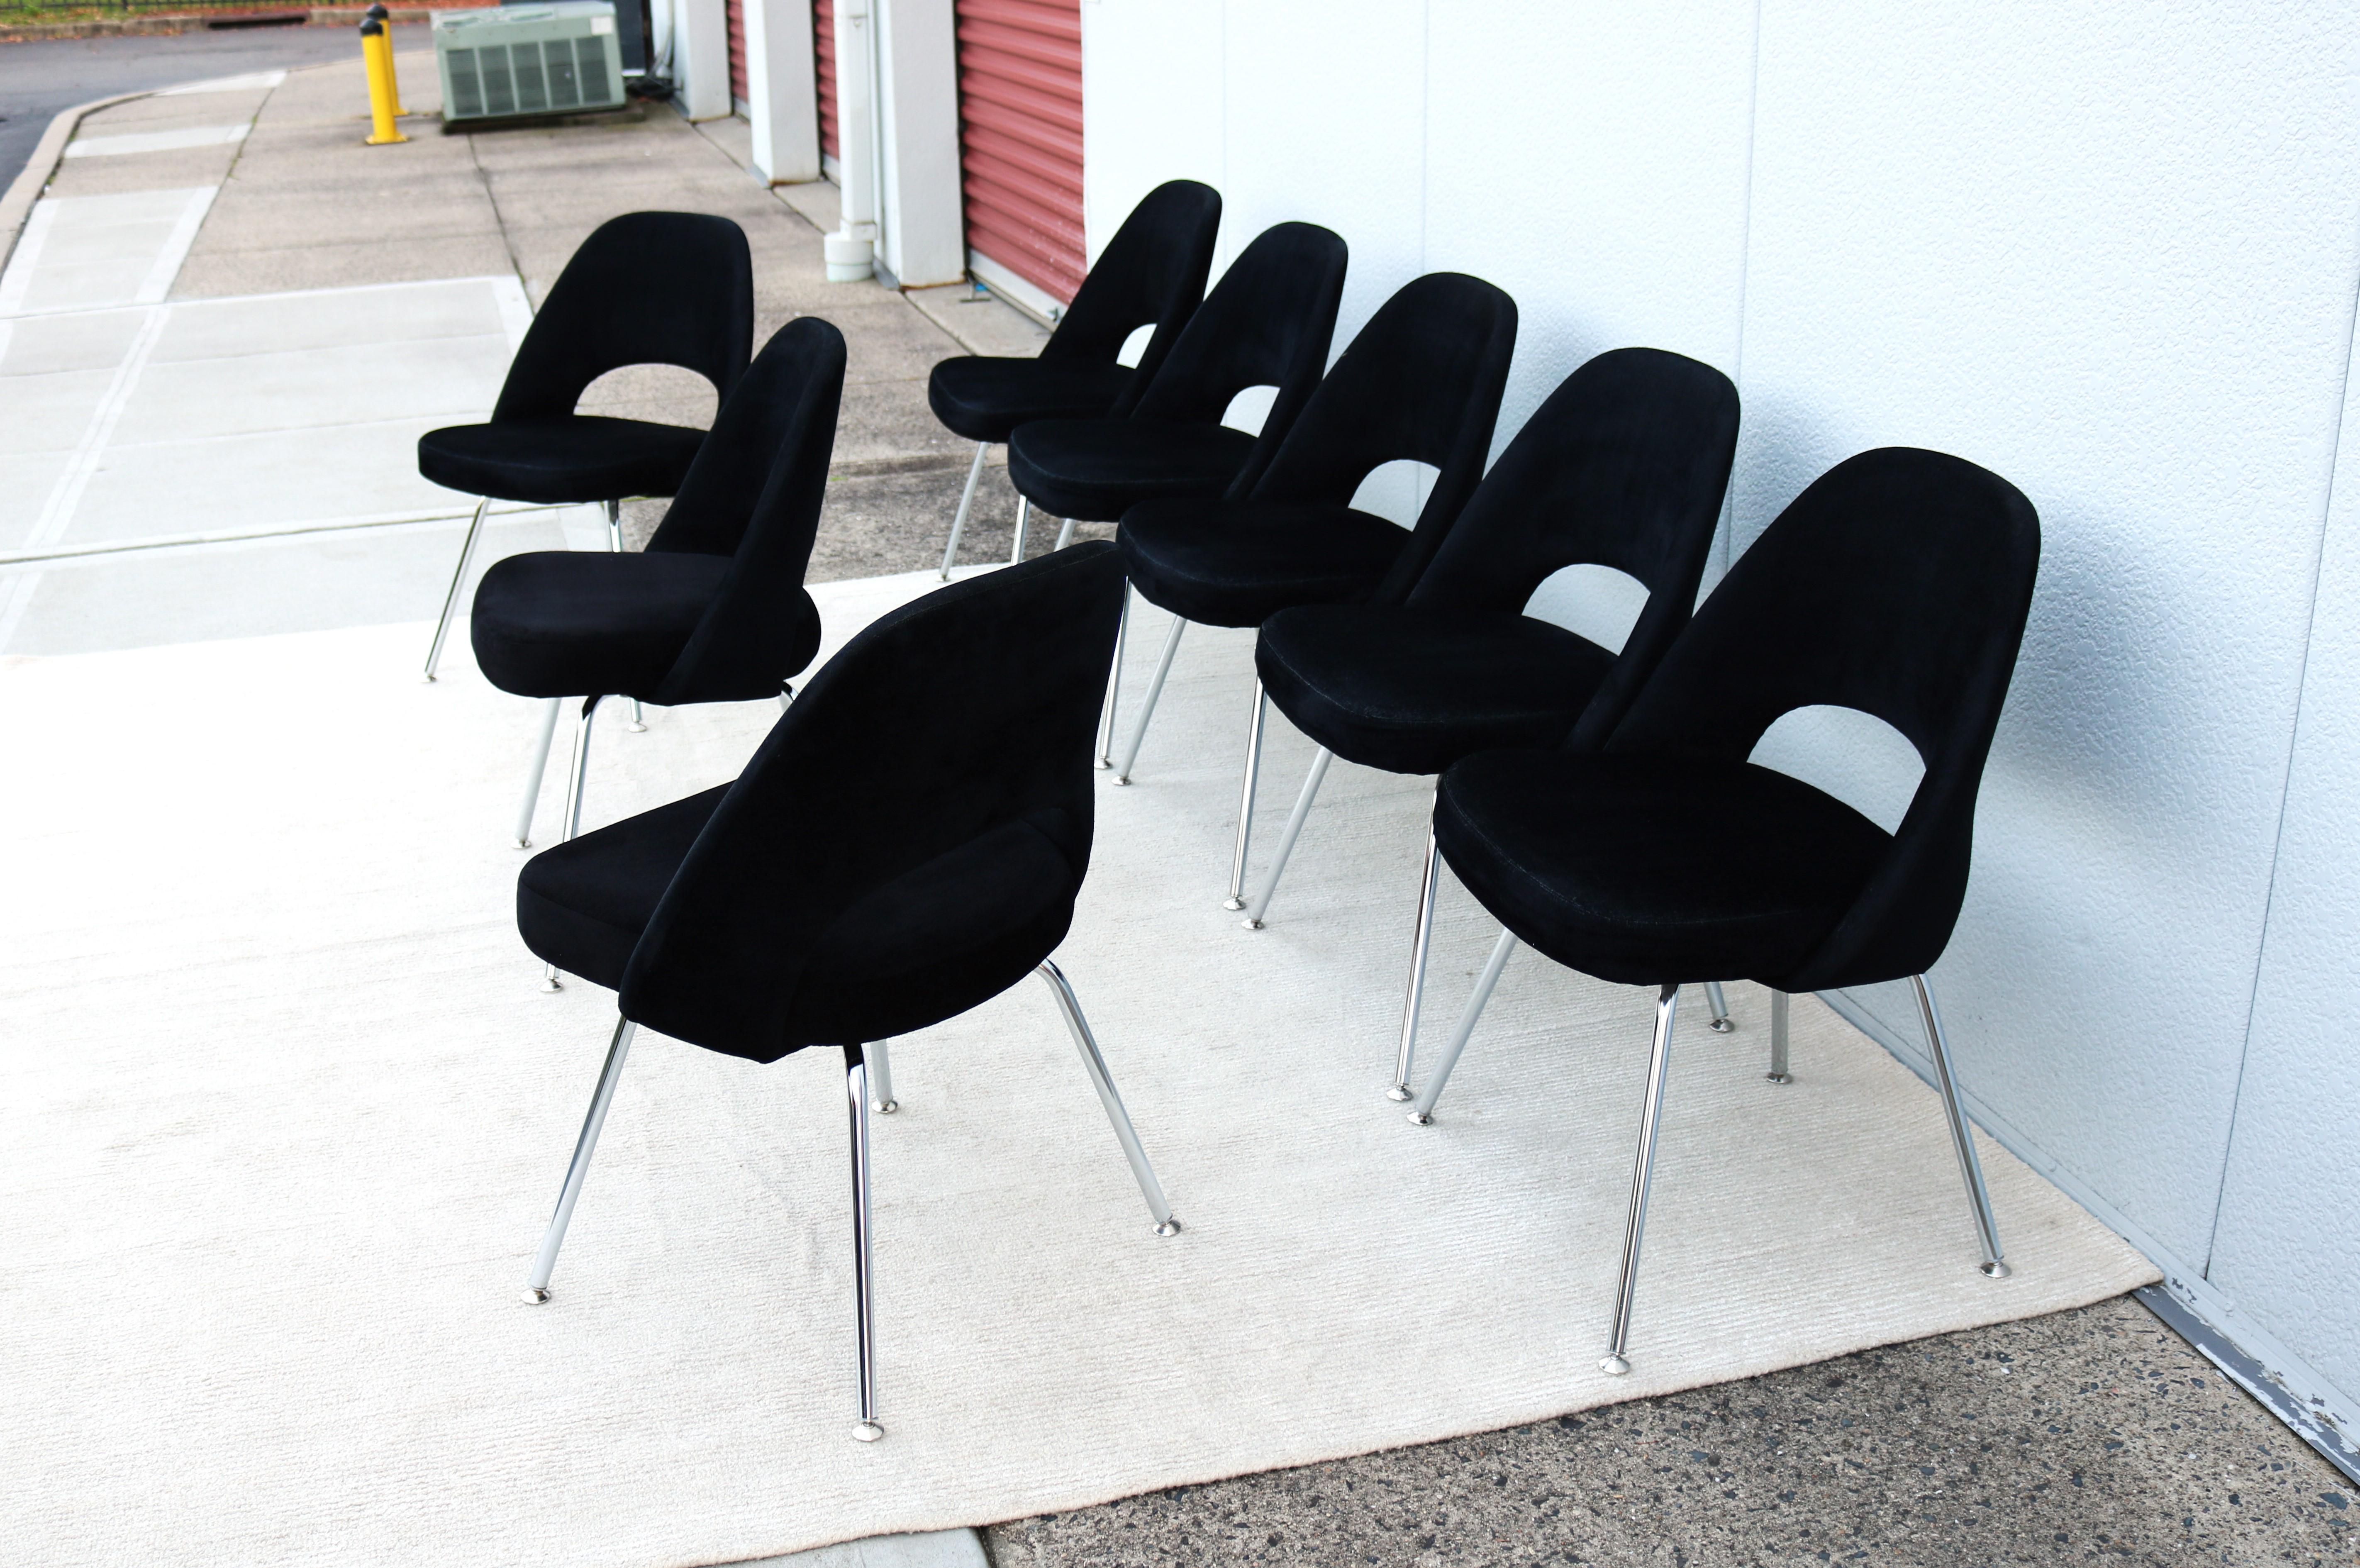 Mid-Century Modern Eero Saarinen for Knoll Executive Armless Chairs - Set of 8 In Good Condition For Sale In Secaucus, NJ